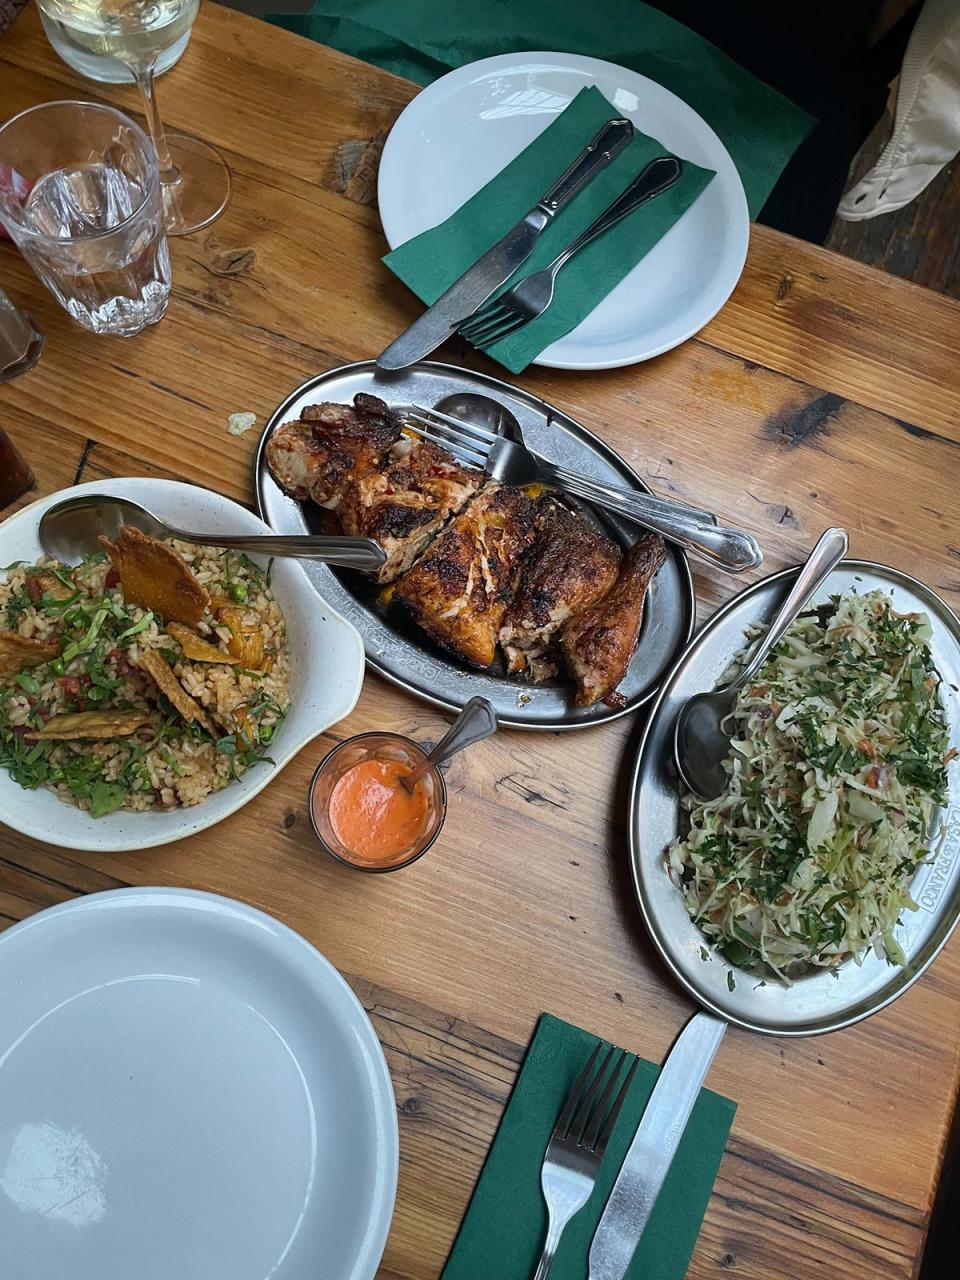 Go to Casa do Frango for the chicken, stay for the vibes (Hannah Twiggs)